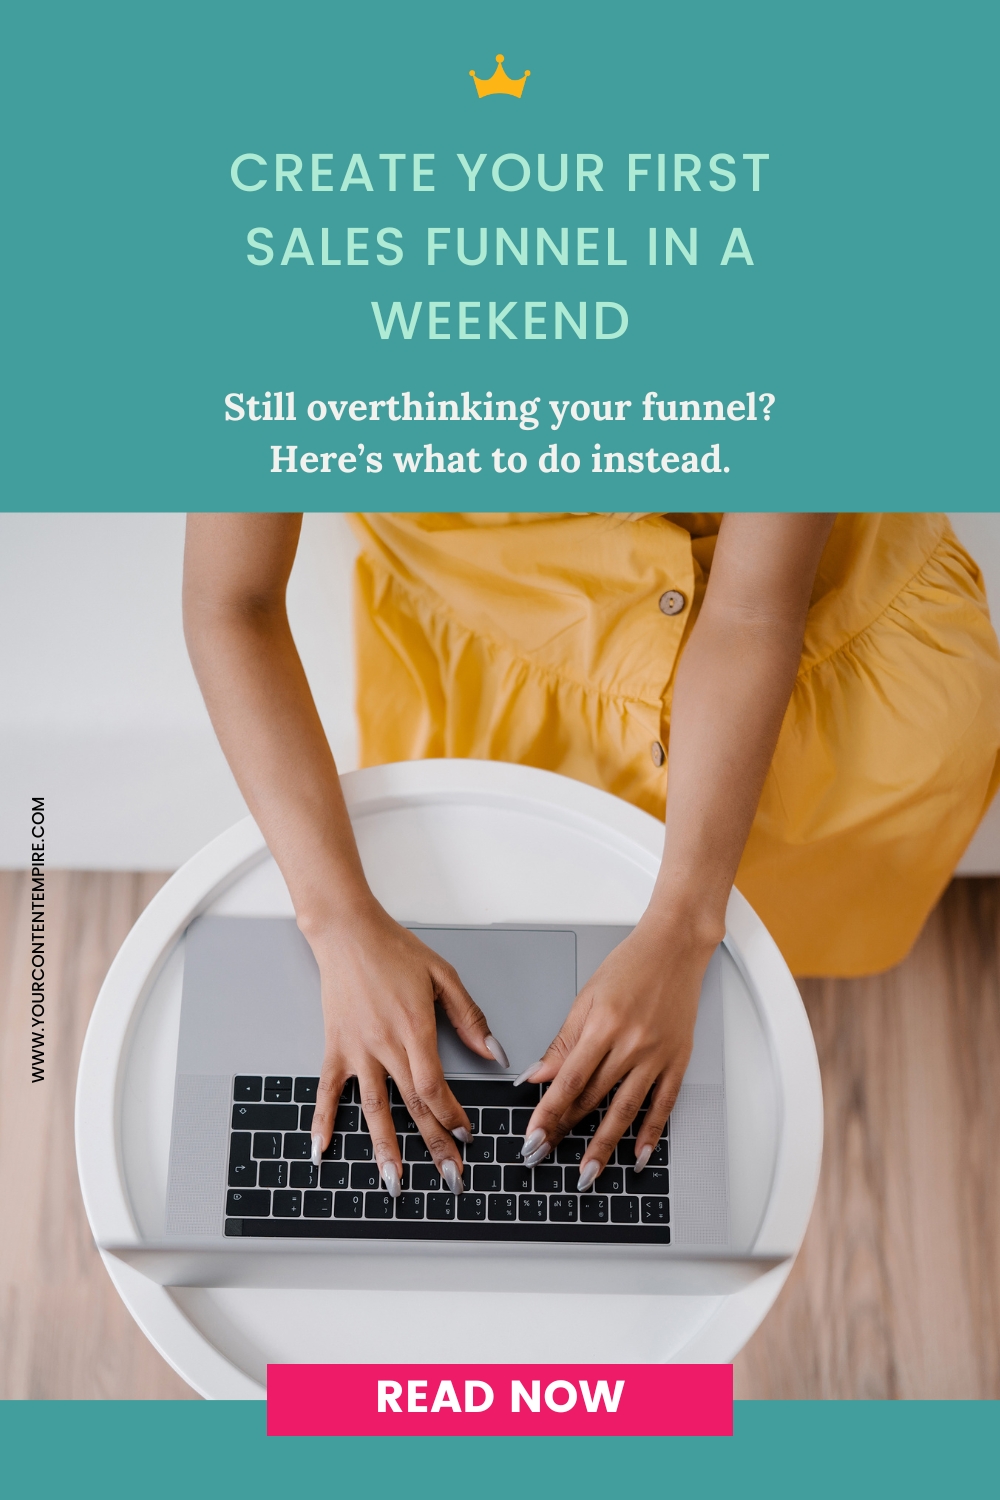 Create Your First Sales Funnel in a Weekend